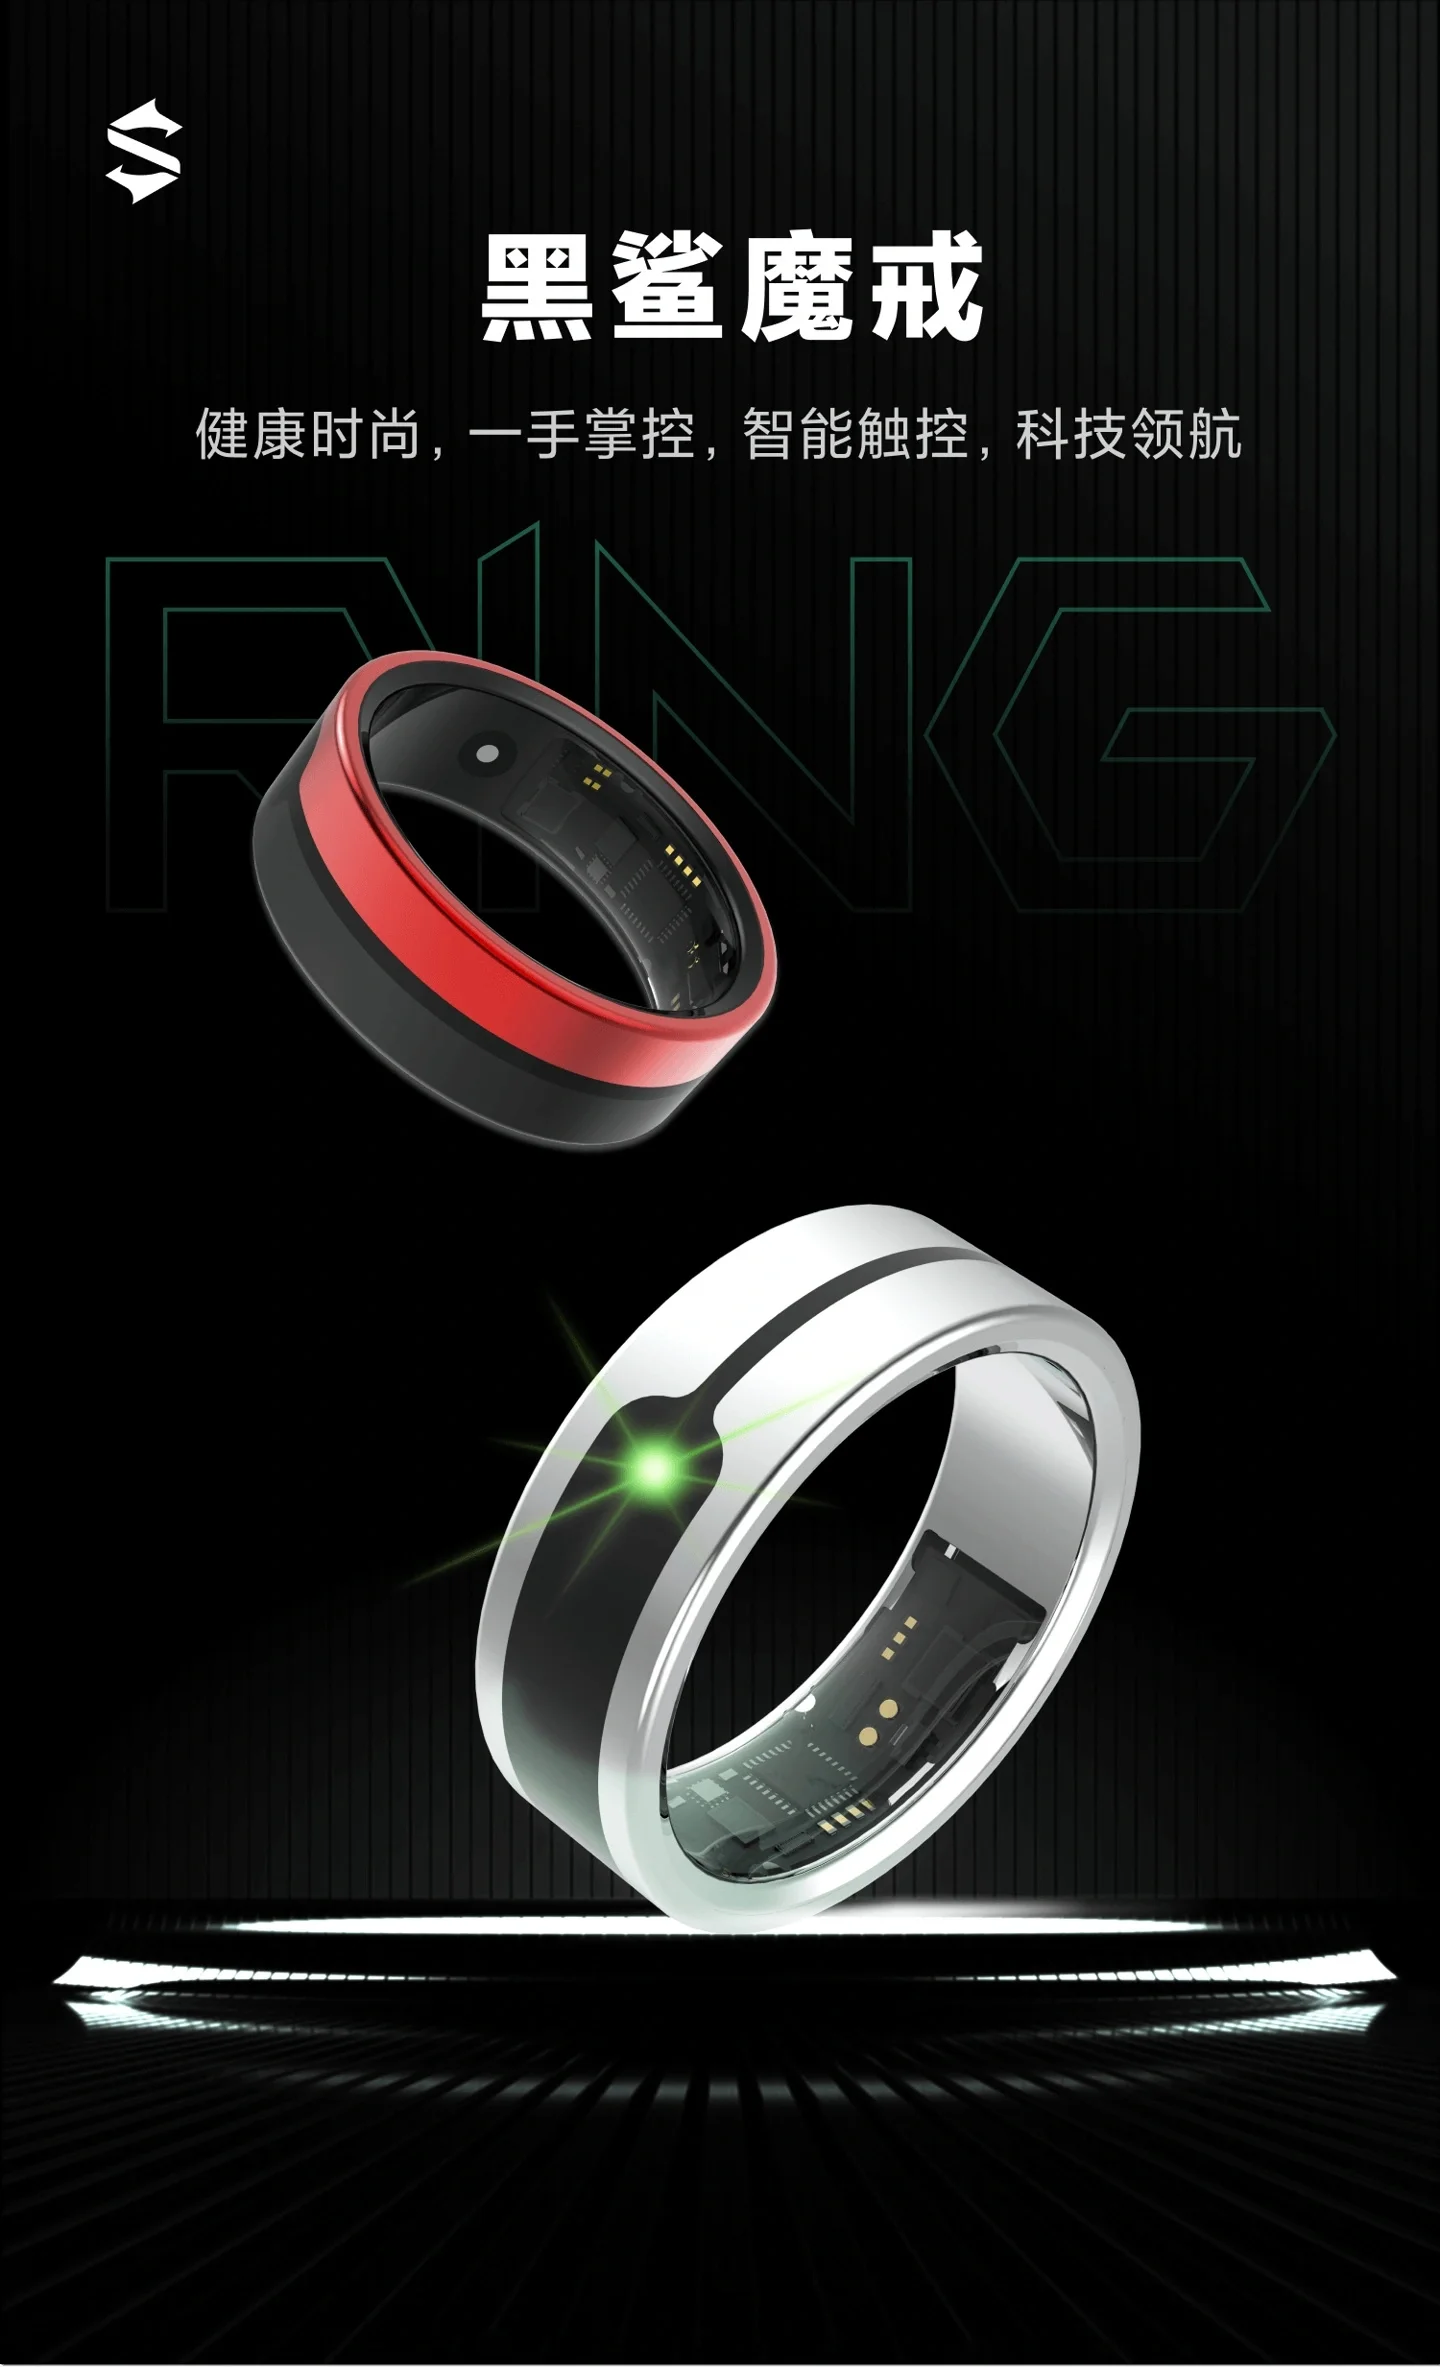 The announcement of a smart ring from Black Shark for mobile gamers took place